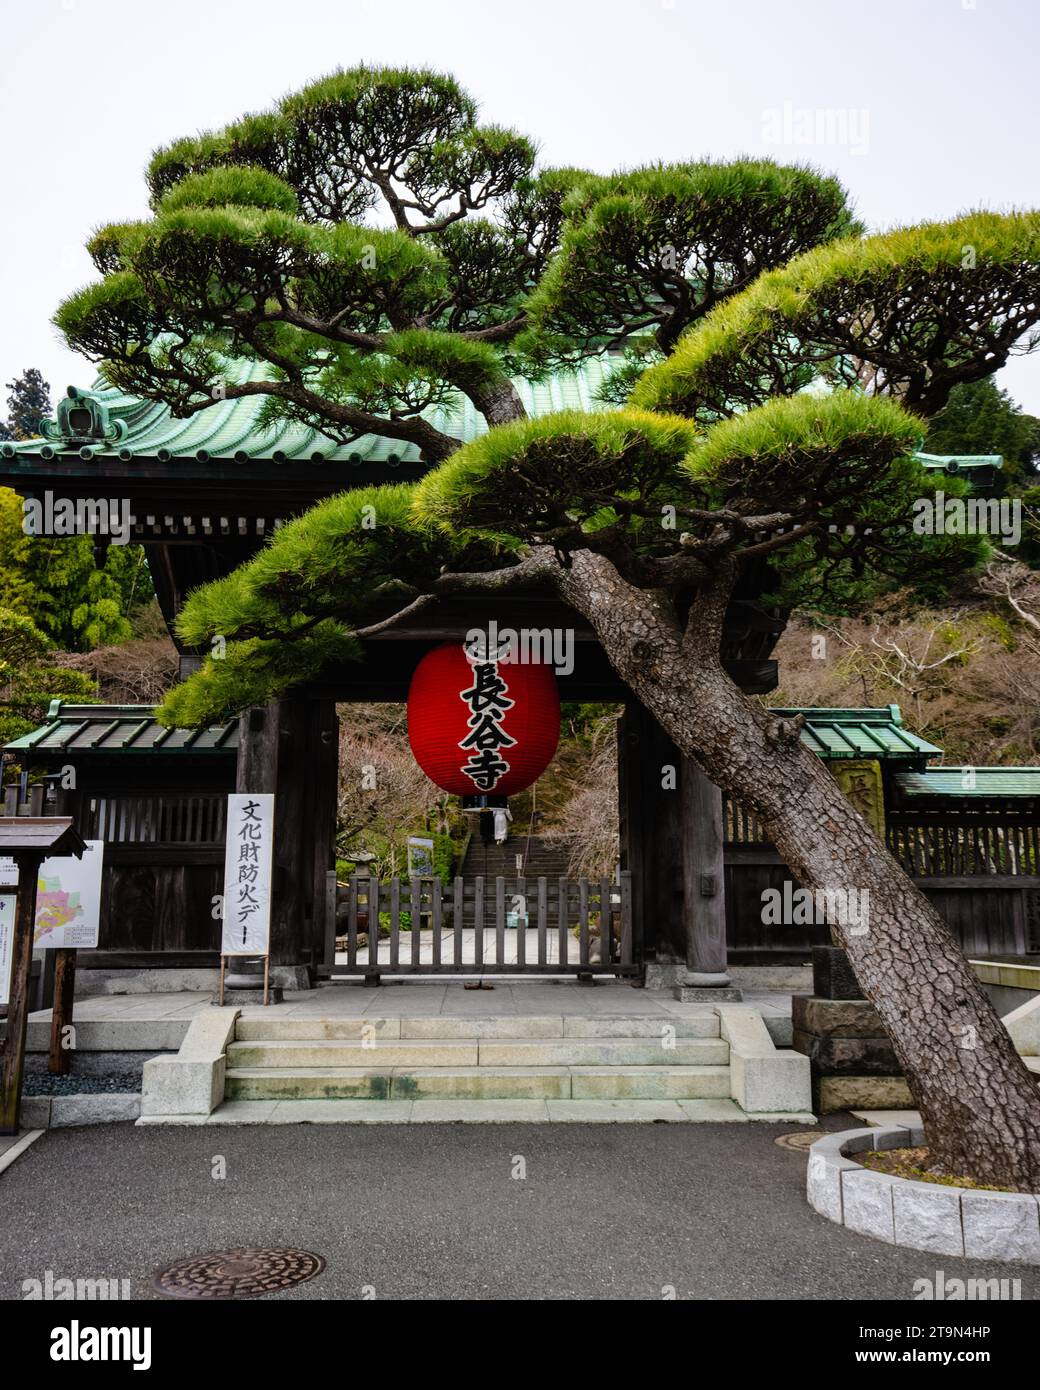 A Hasadera Buddhist Temple in Kamakura Japansurrounded by lush greenery and illuminated by bright red lanterns Stock Photo